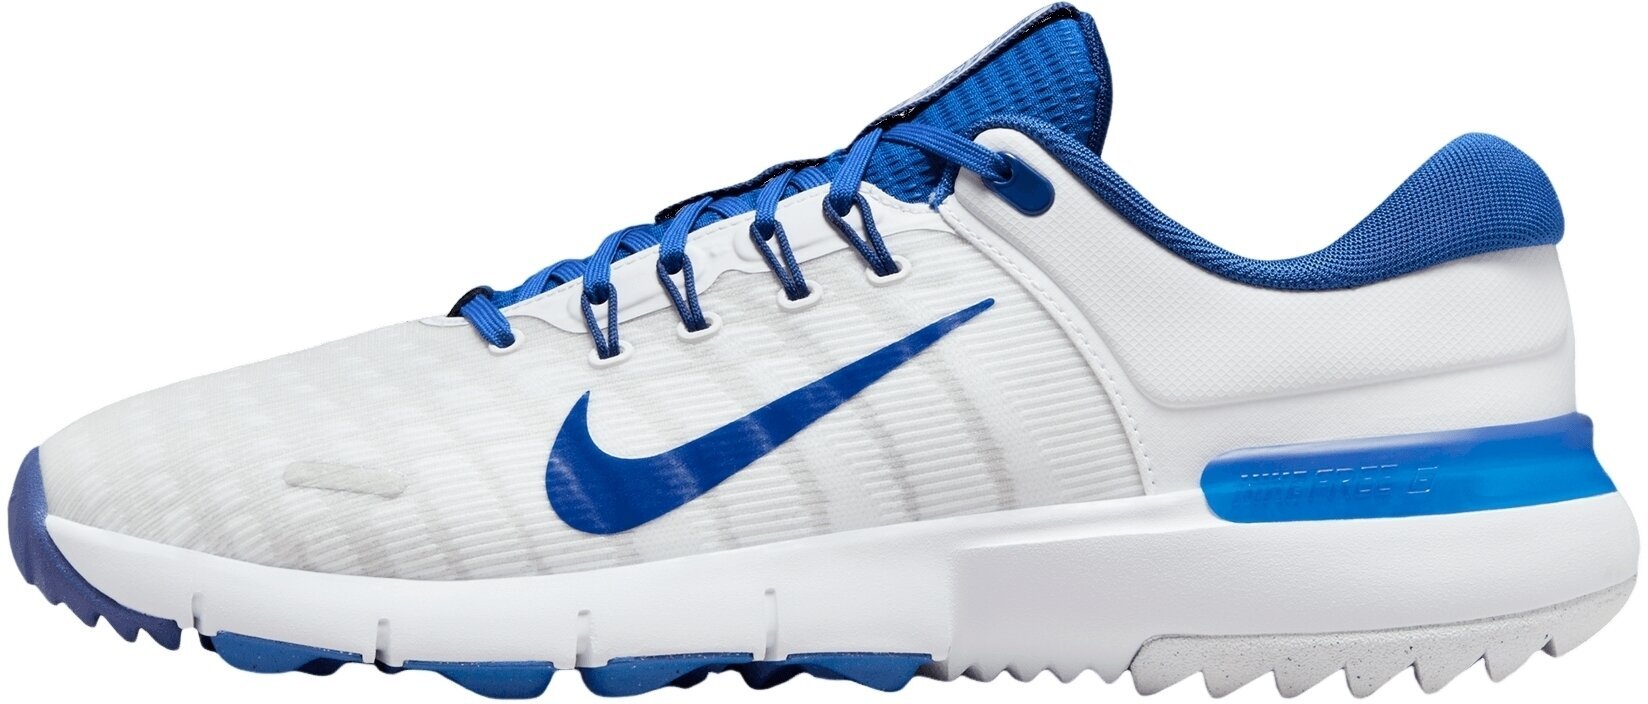 Chaussures de golf pour hommes Nike Free Golf Unisex Shoes Game Royal/Deep Royal Blue/Football Grey 44,5